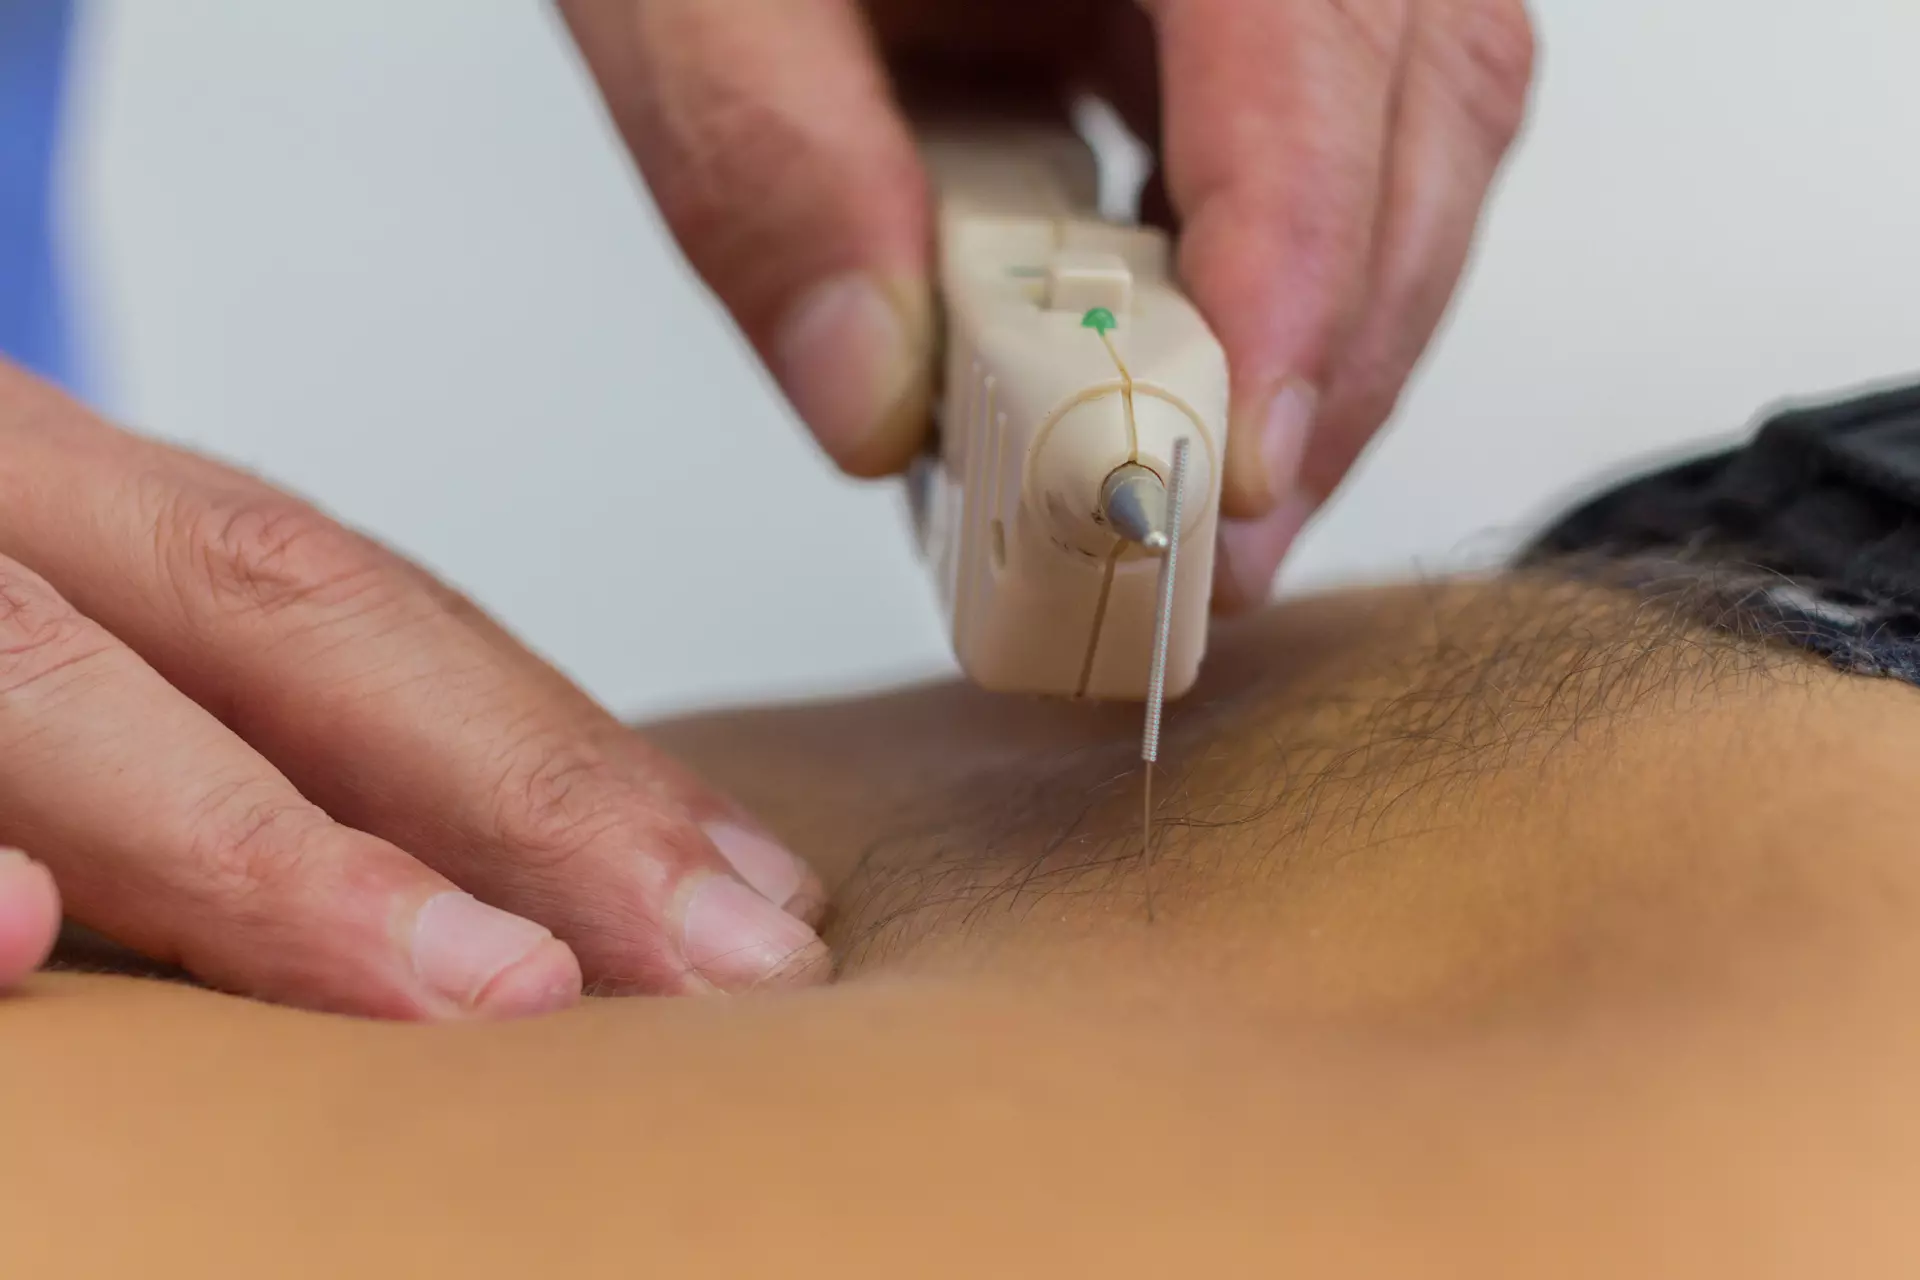 chania acupuncture and intramuscular stimulation - chania physiotherapy clinic